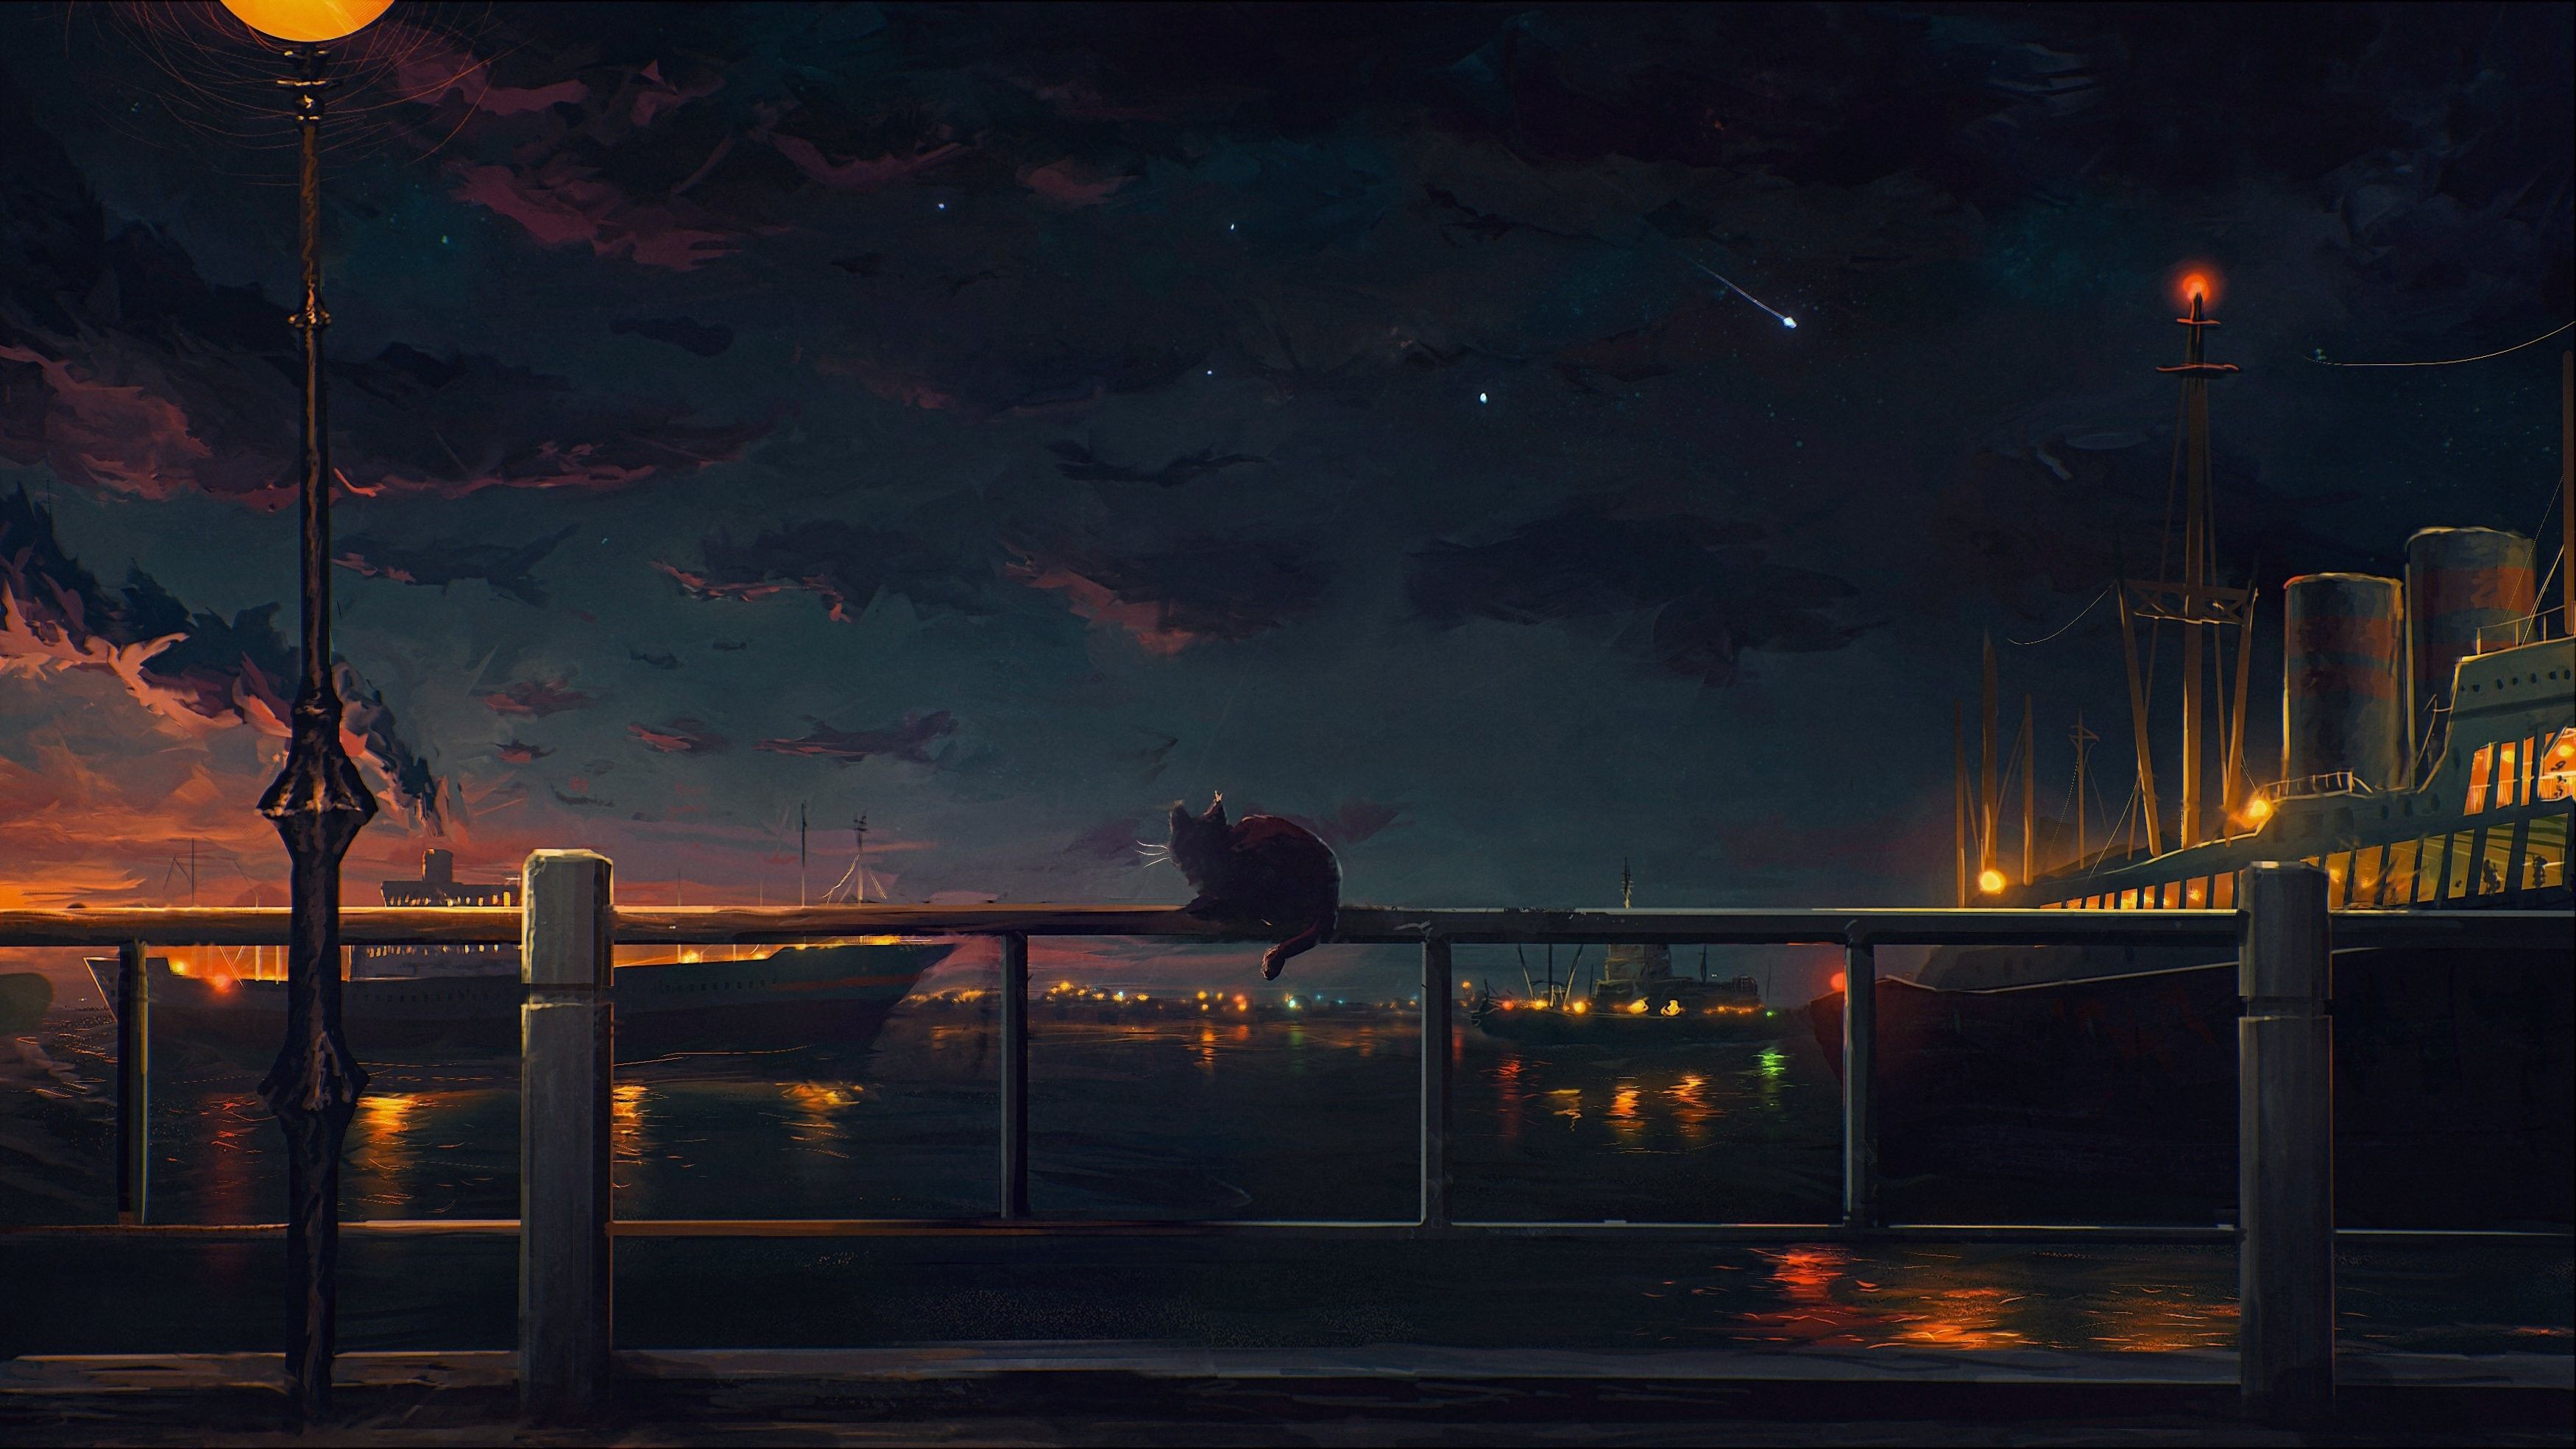 A cat sitting on the edge of some water - Night, anime city, anime landscape